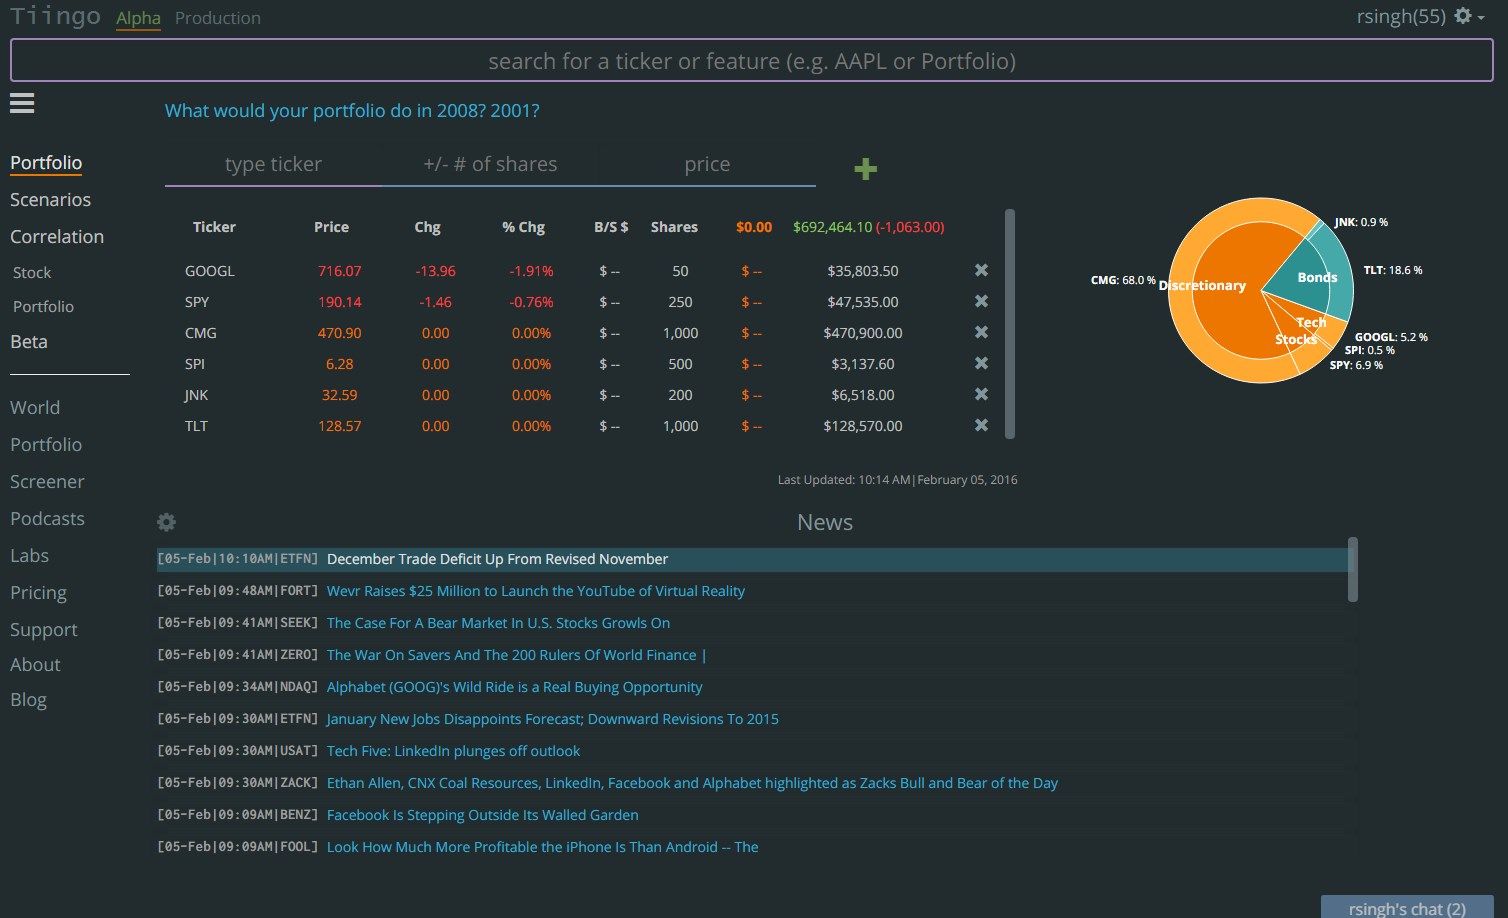 The portfolio monitoring tool helps you keep track of your portfolio's vaue, data, and real-time news